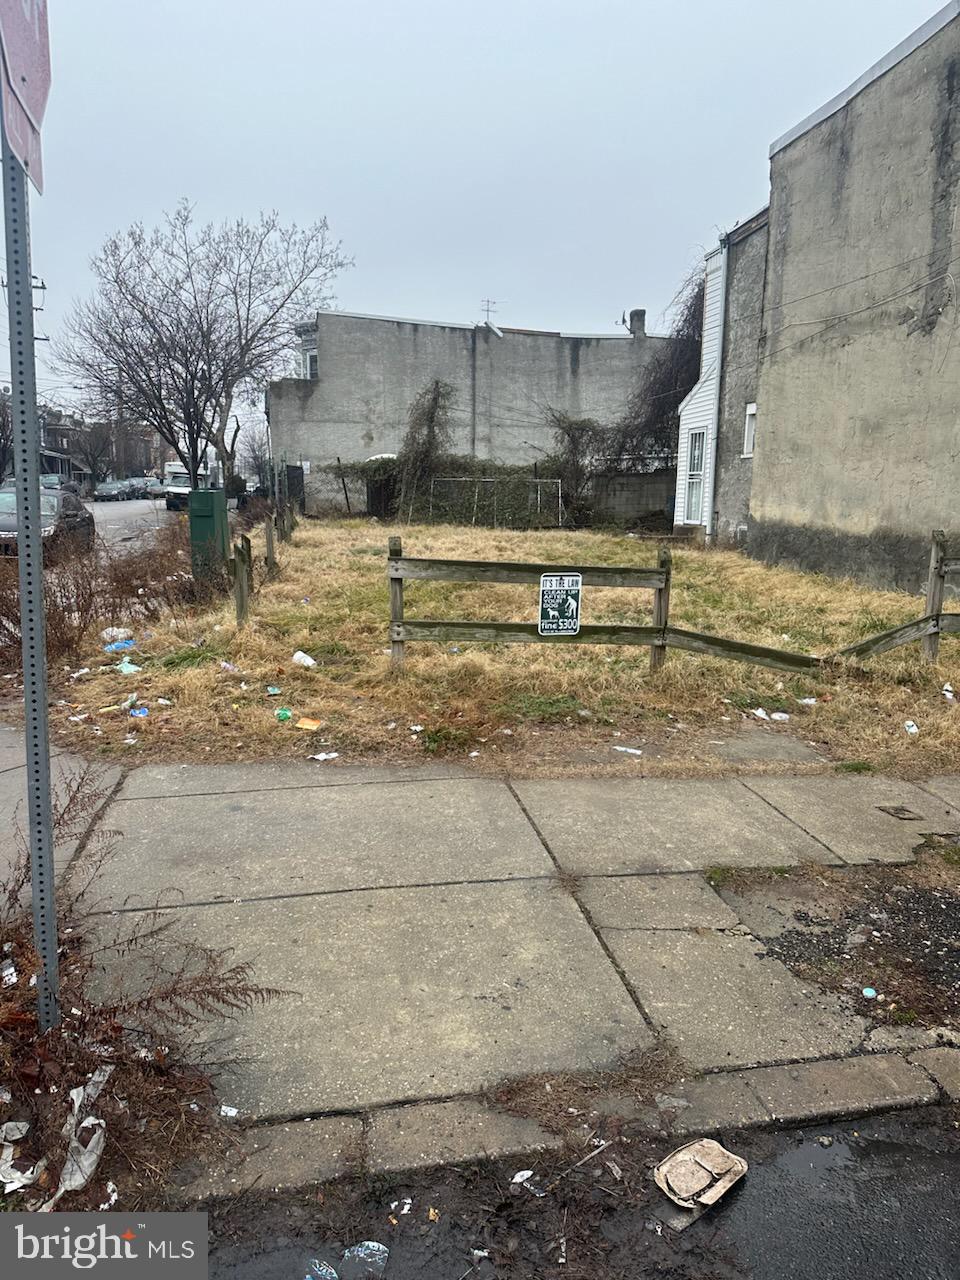 a view of a yard with an empty space